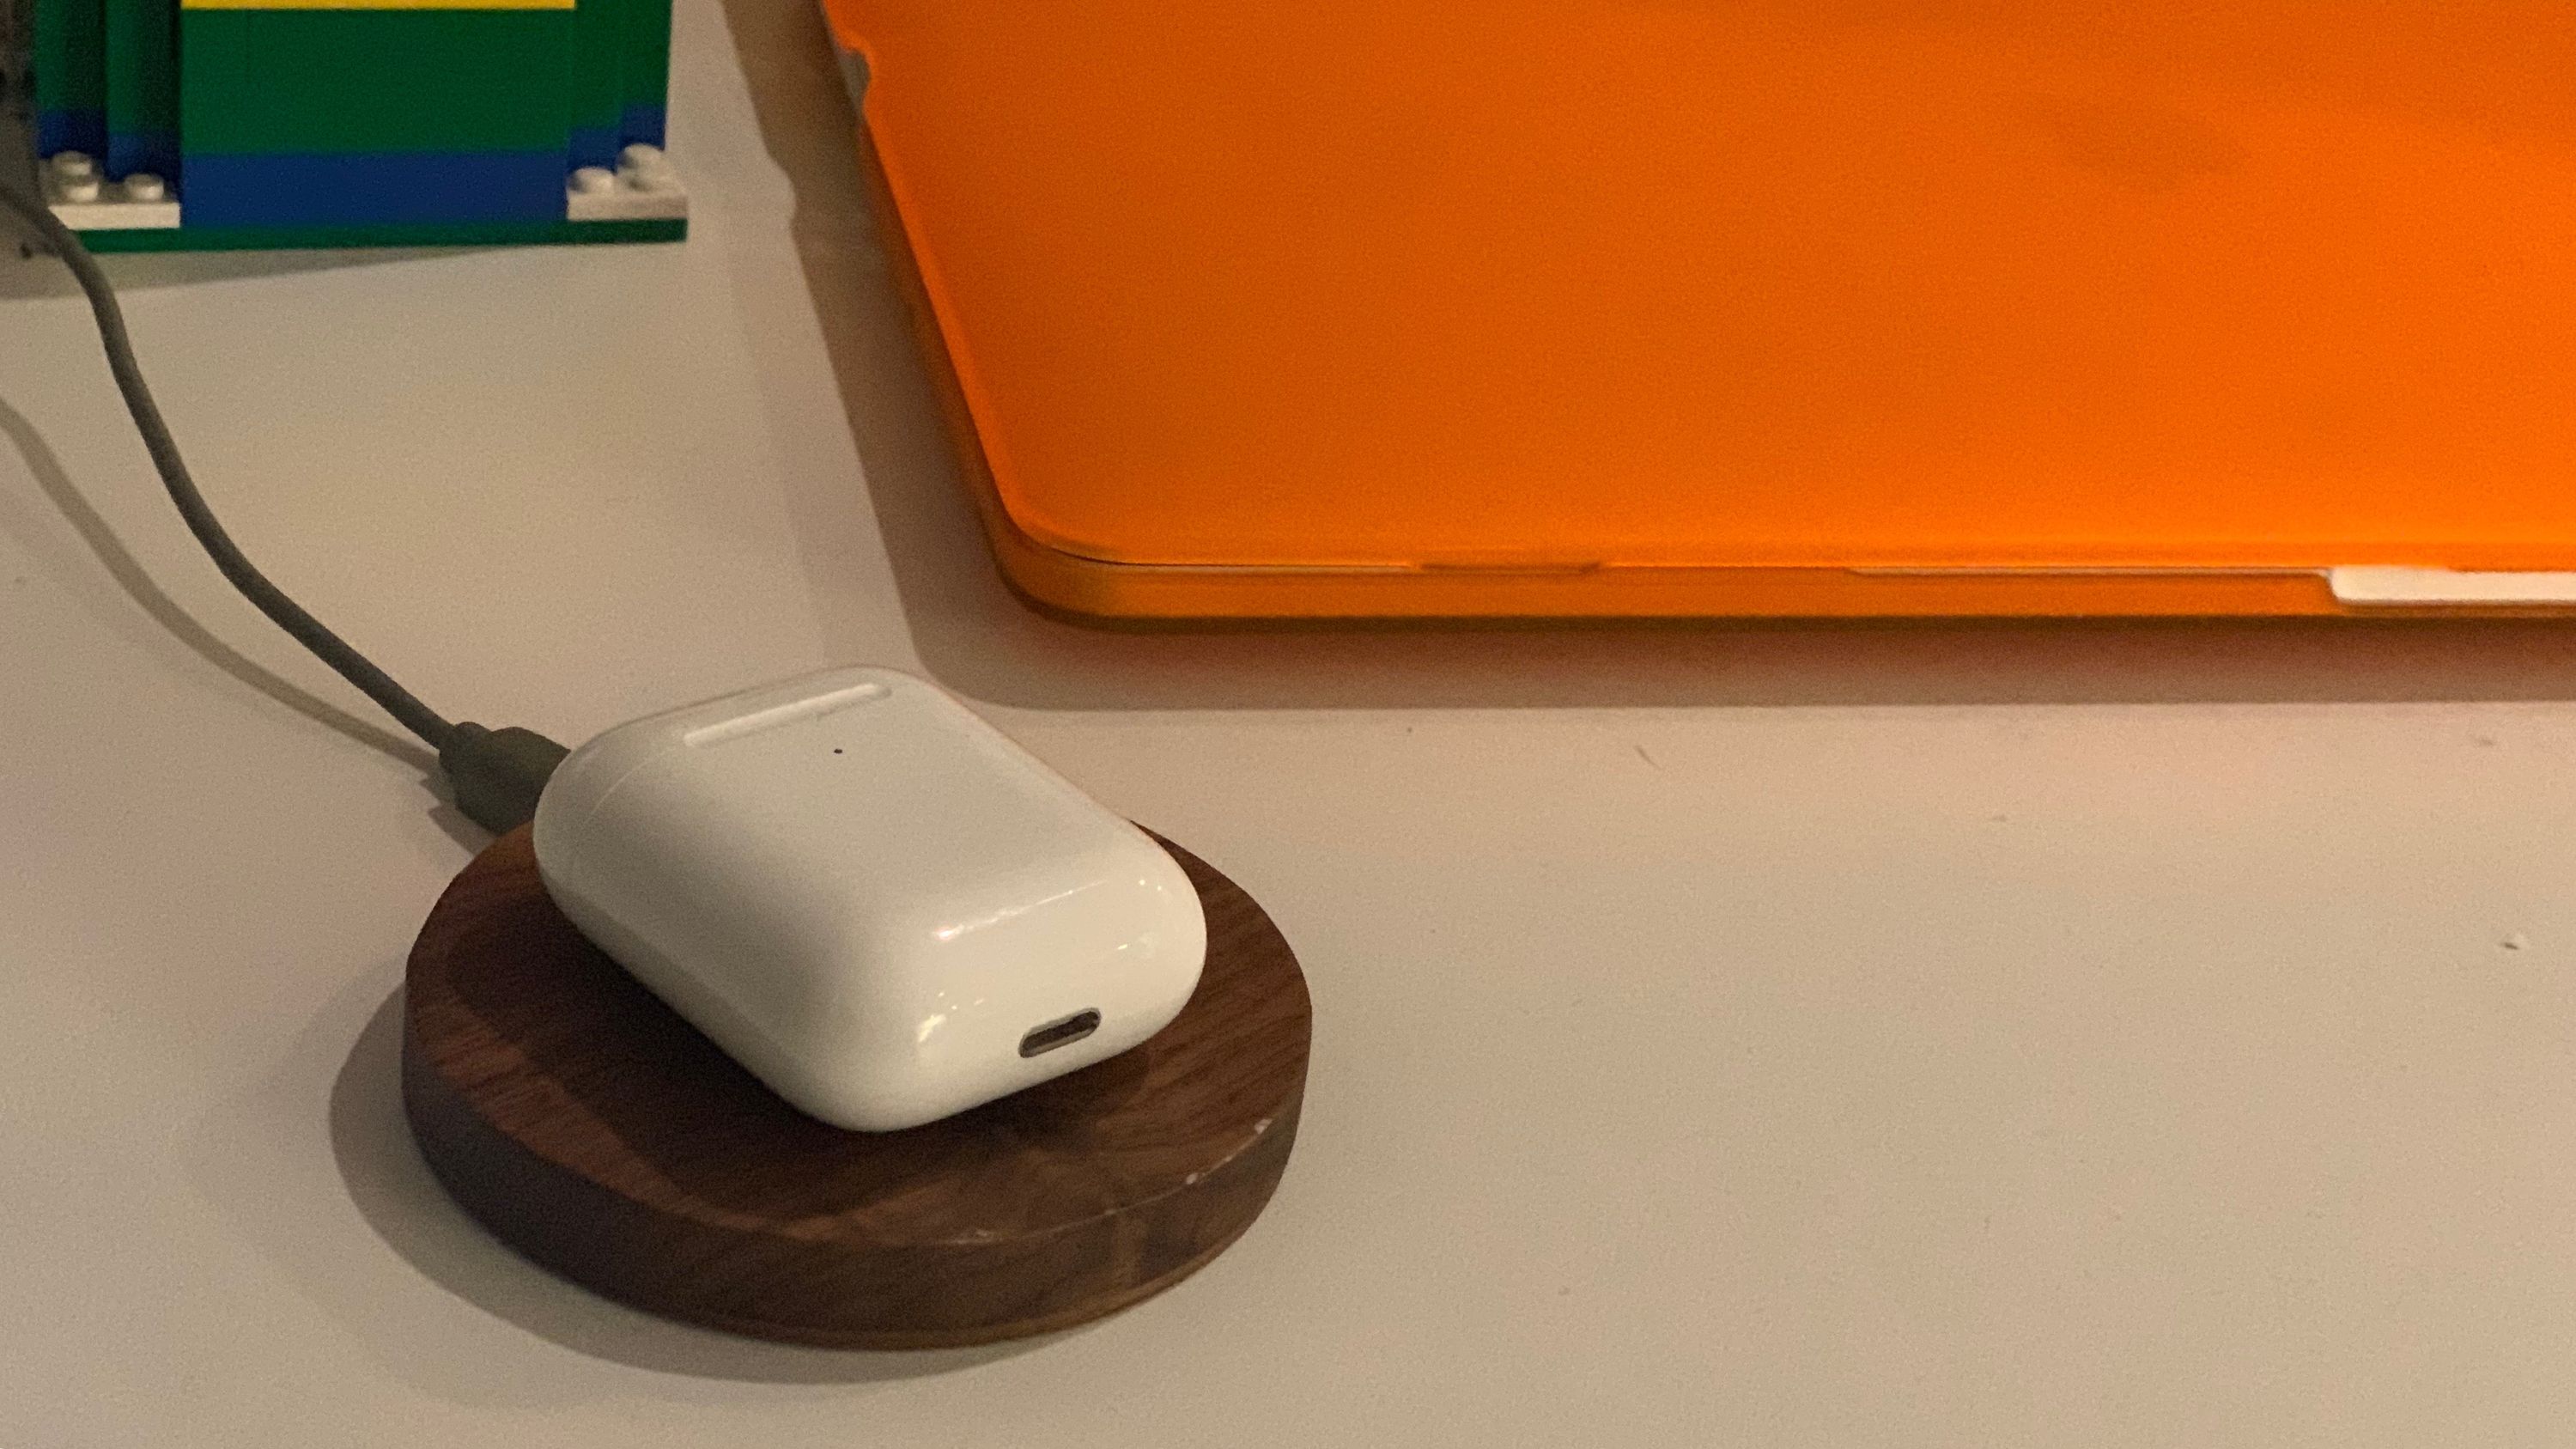 Airpods Charging Wirelessly